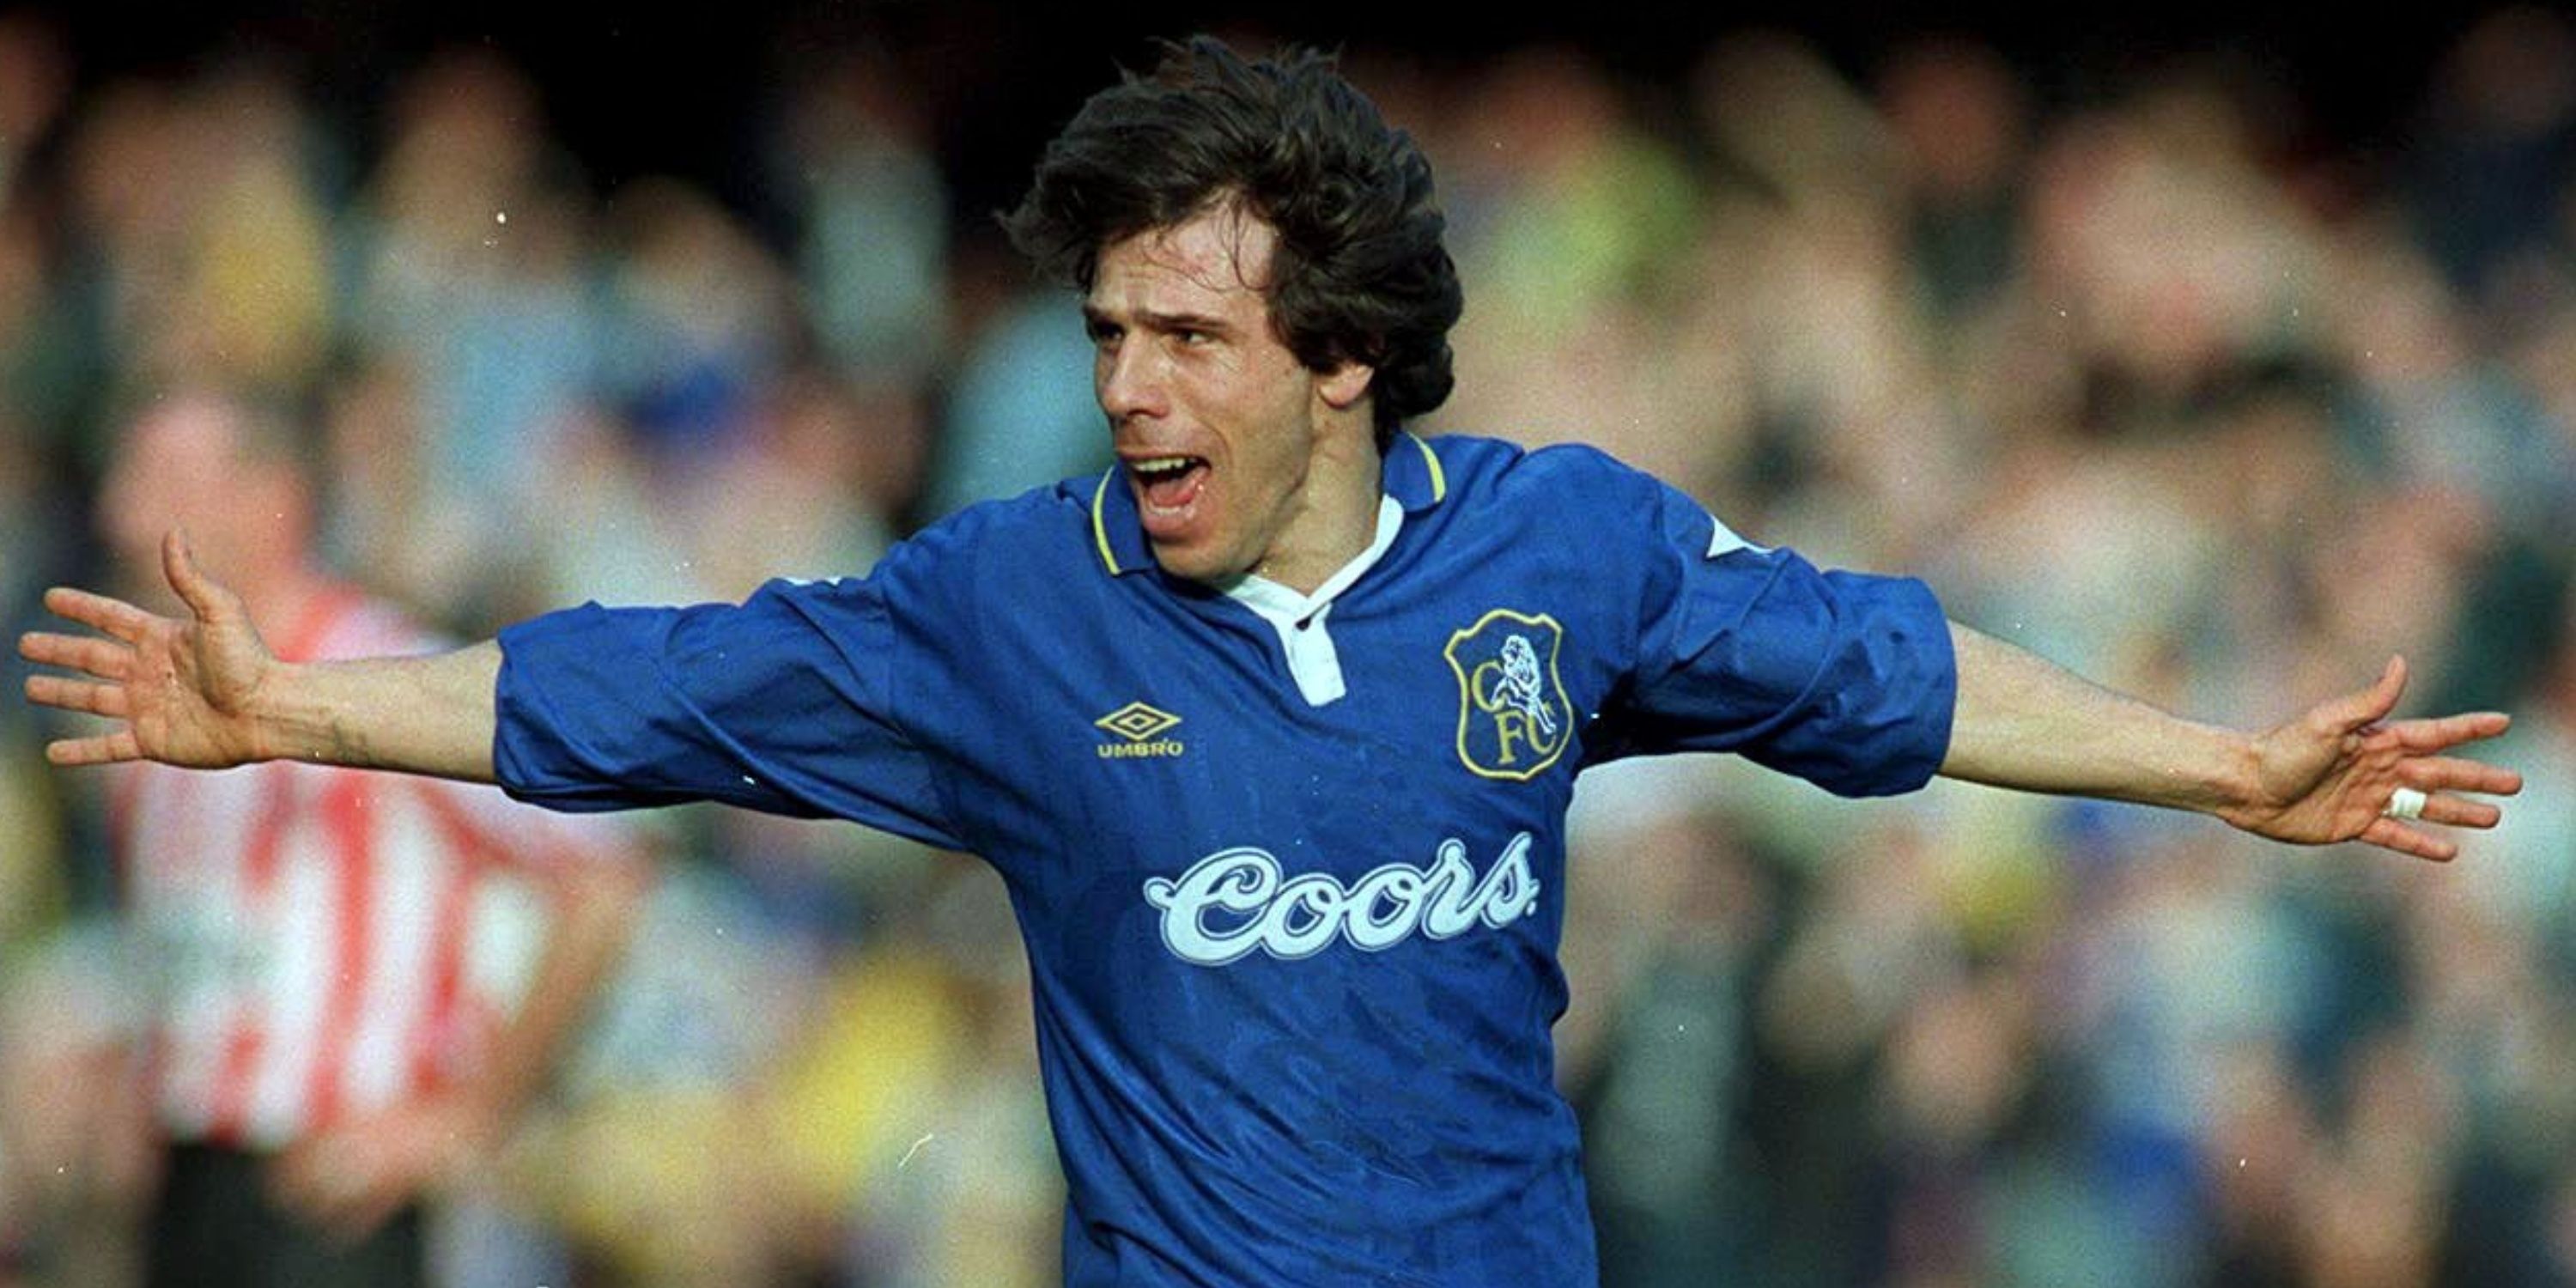 Gianfranco Zola celebrates with his arms outstretched after scoring for Chelsea.